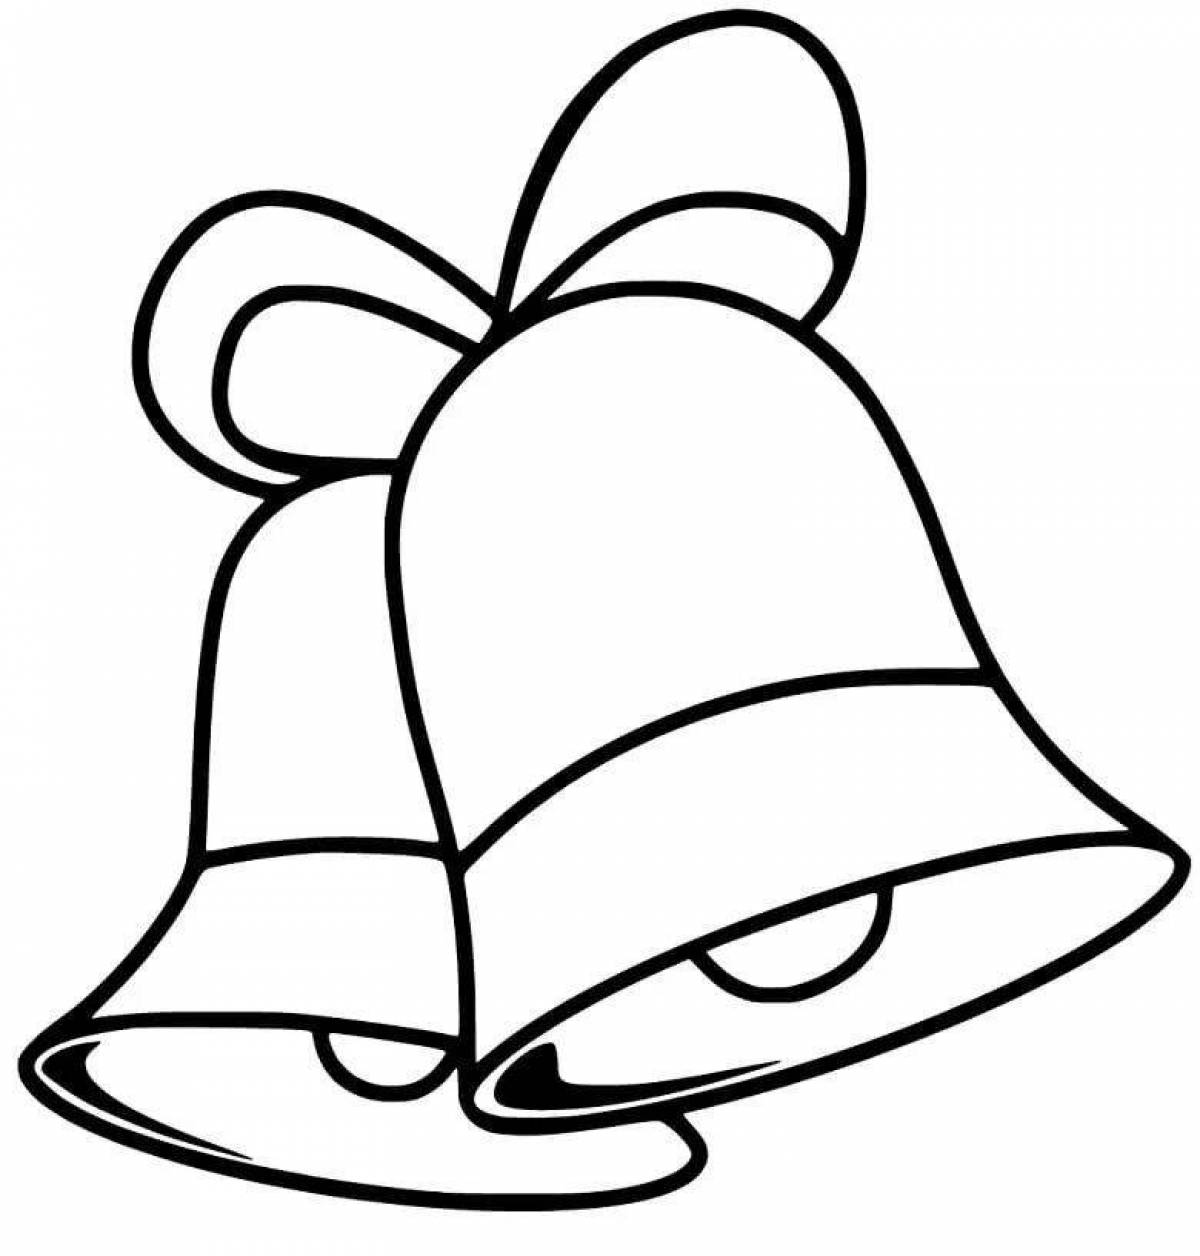 Coloring page cheerful school bell